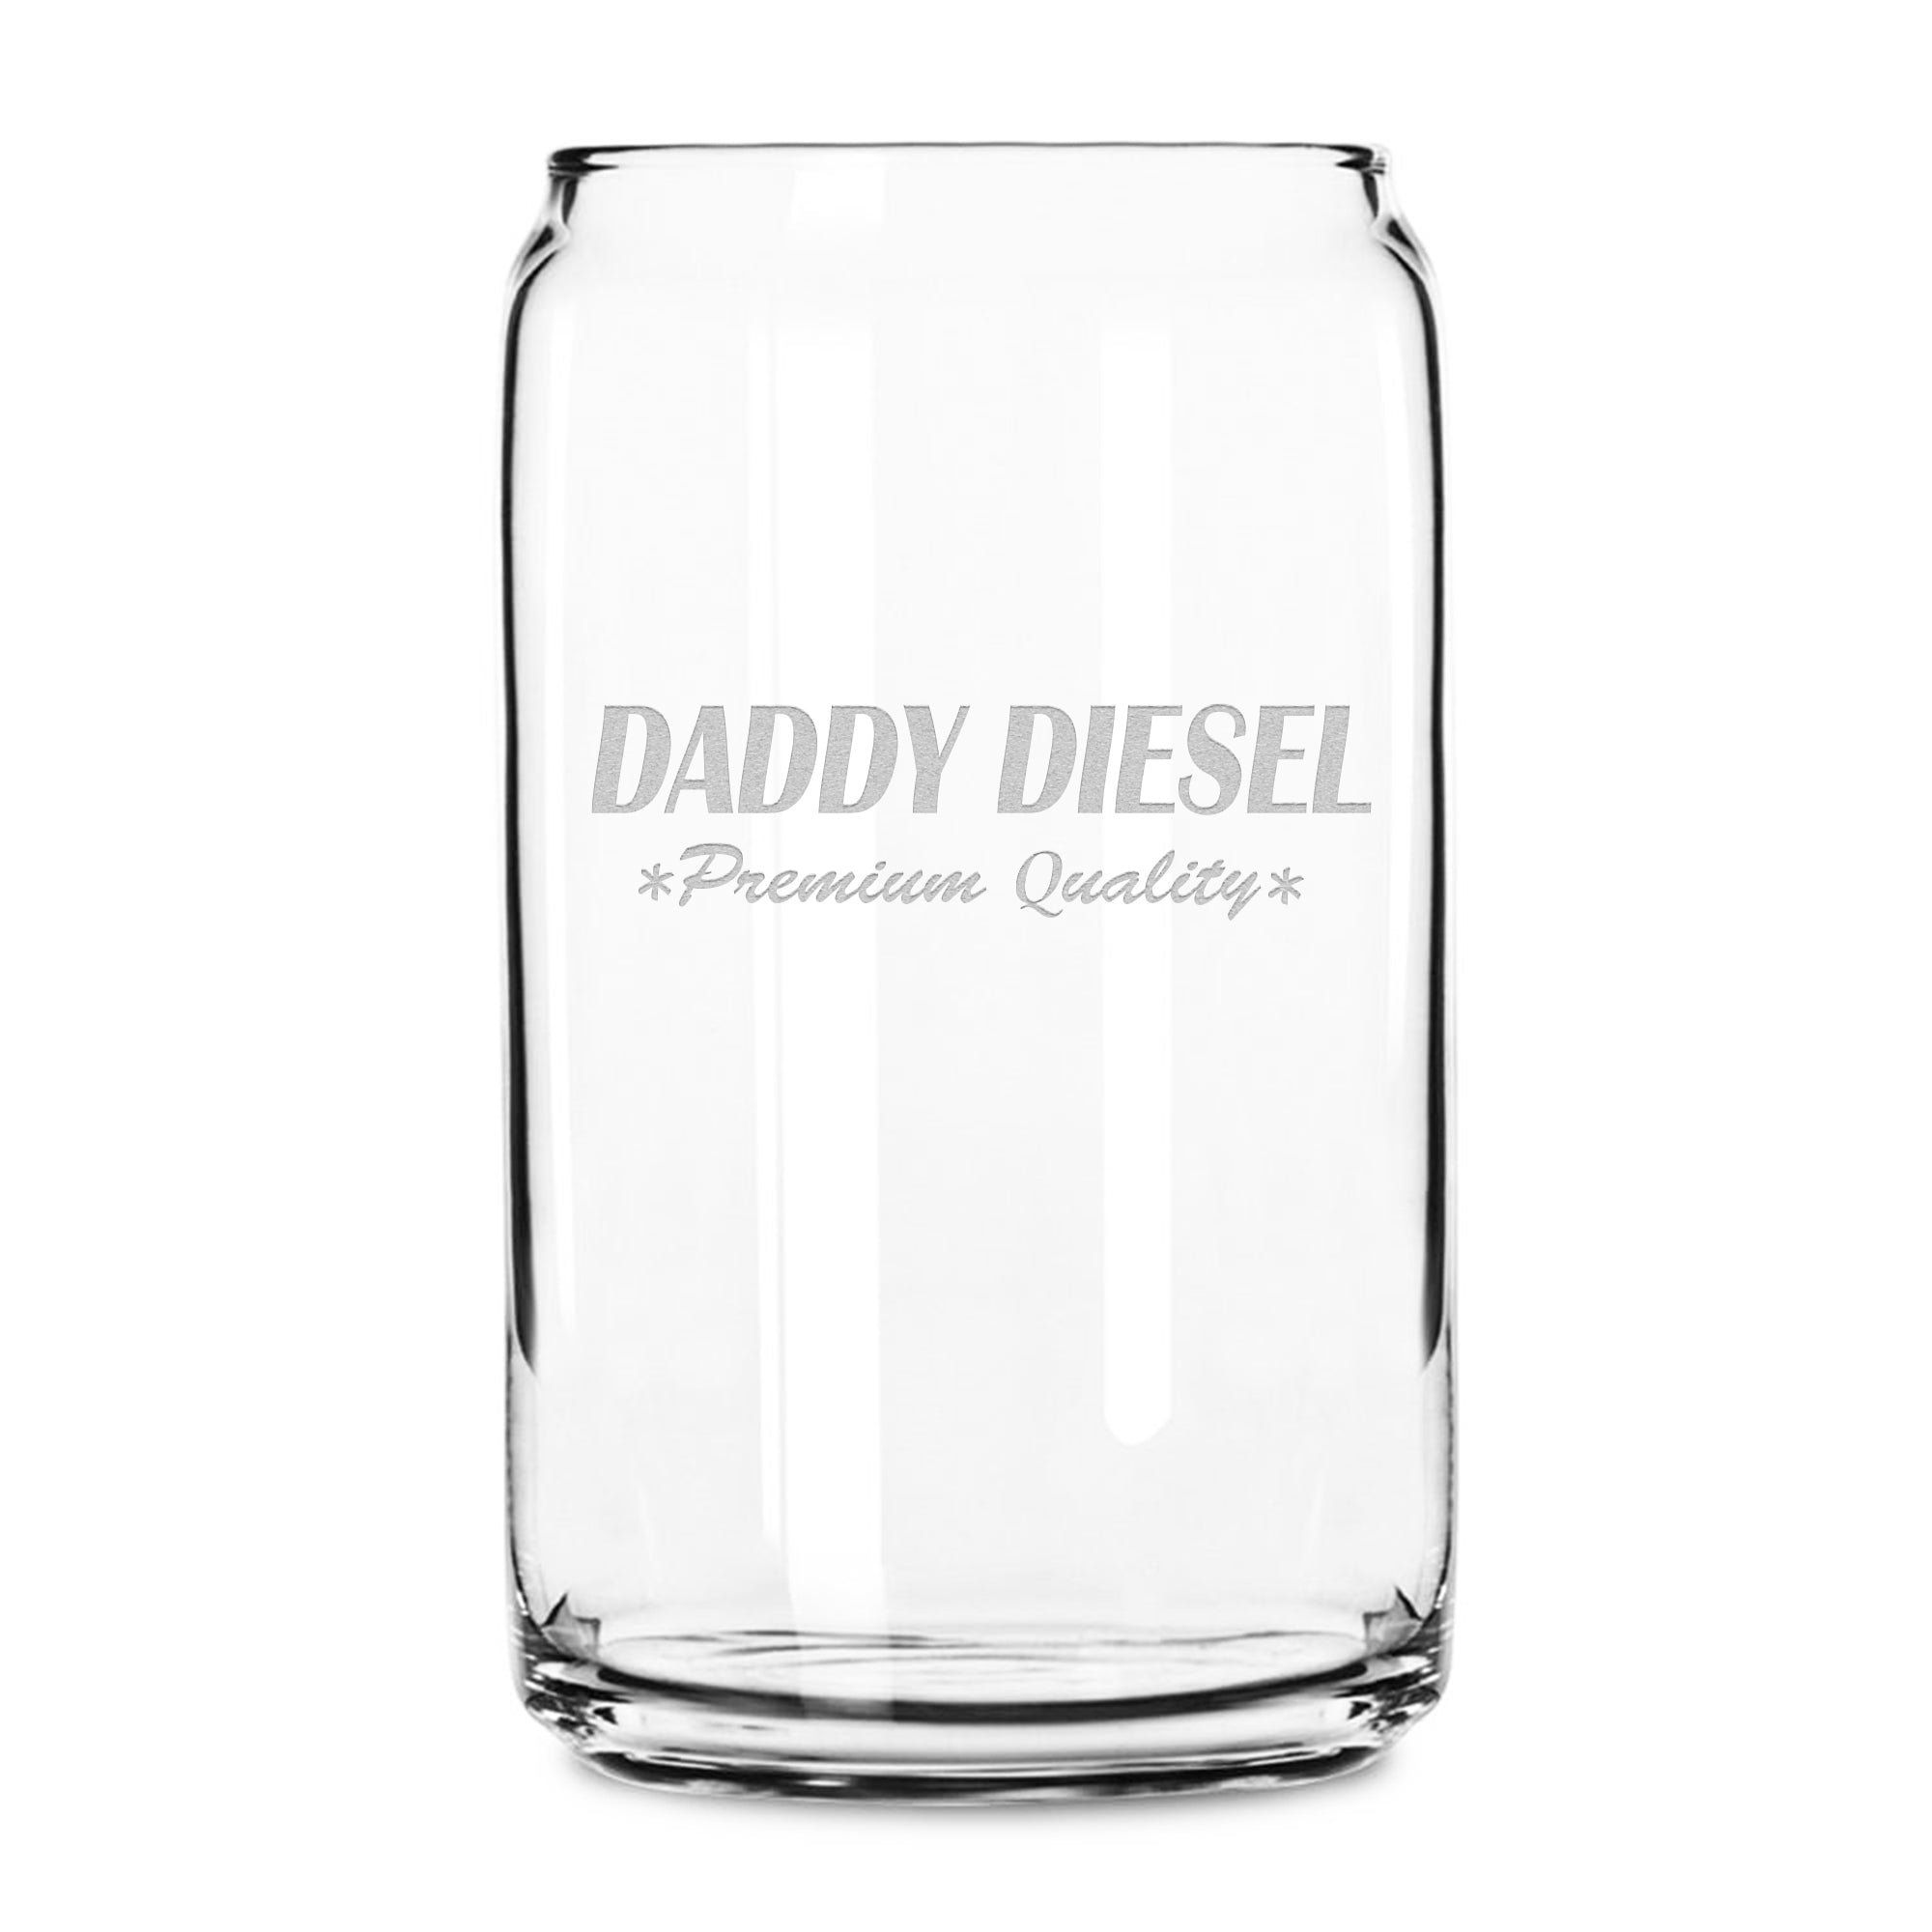 Integrity Bottles, Daddy Diesel, Premium Beer Can Glass, Handmade, Handblown, Laser Etched or Hand Etched Gifts, Sand Carved, 16oz